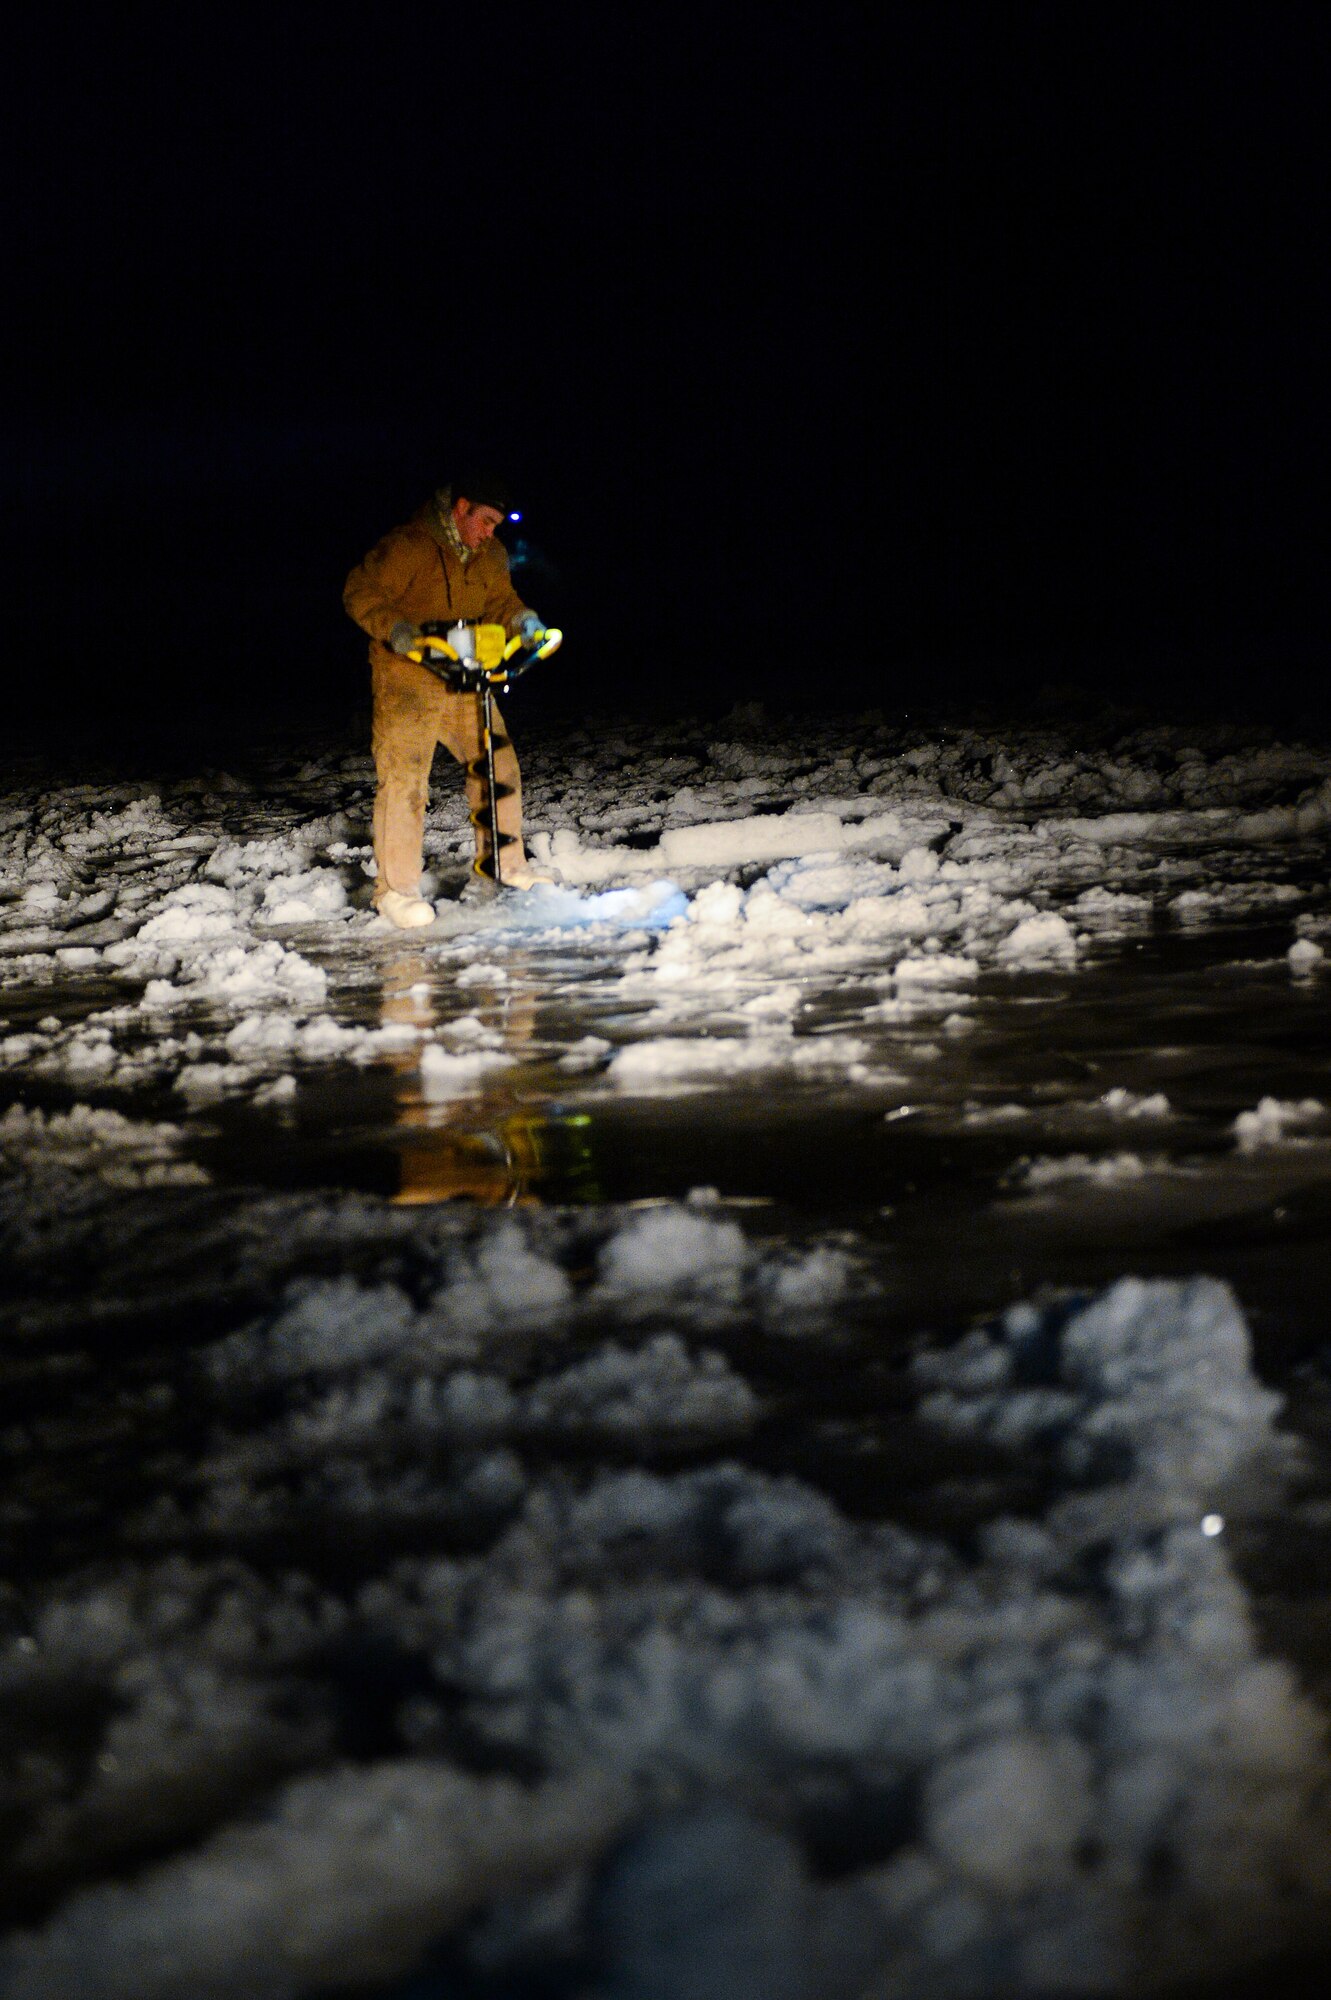 Senior Airman Tyler Dray uses an ice auger while constructing an ice bridge in Fairbanks, Alaska, Nov. 20, 2014. The bridge must be constructed every other year to provide access to the $20 million range complex used to train pilots from around the world during Red Flag-Alaska exercises. Dray is a range maintenance structures journeyman assigned to the 354th Civil Engineer Squadron. (U.S. Air Force photo/Staff Sgt. Shawn Nickel) 